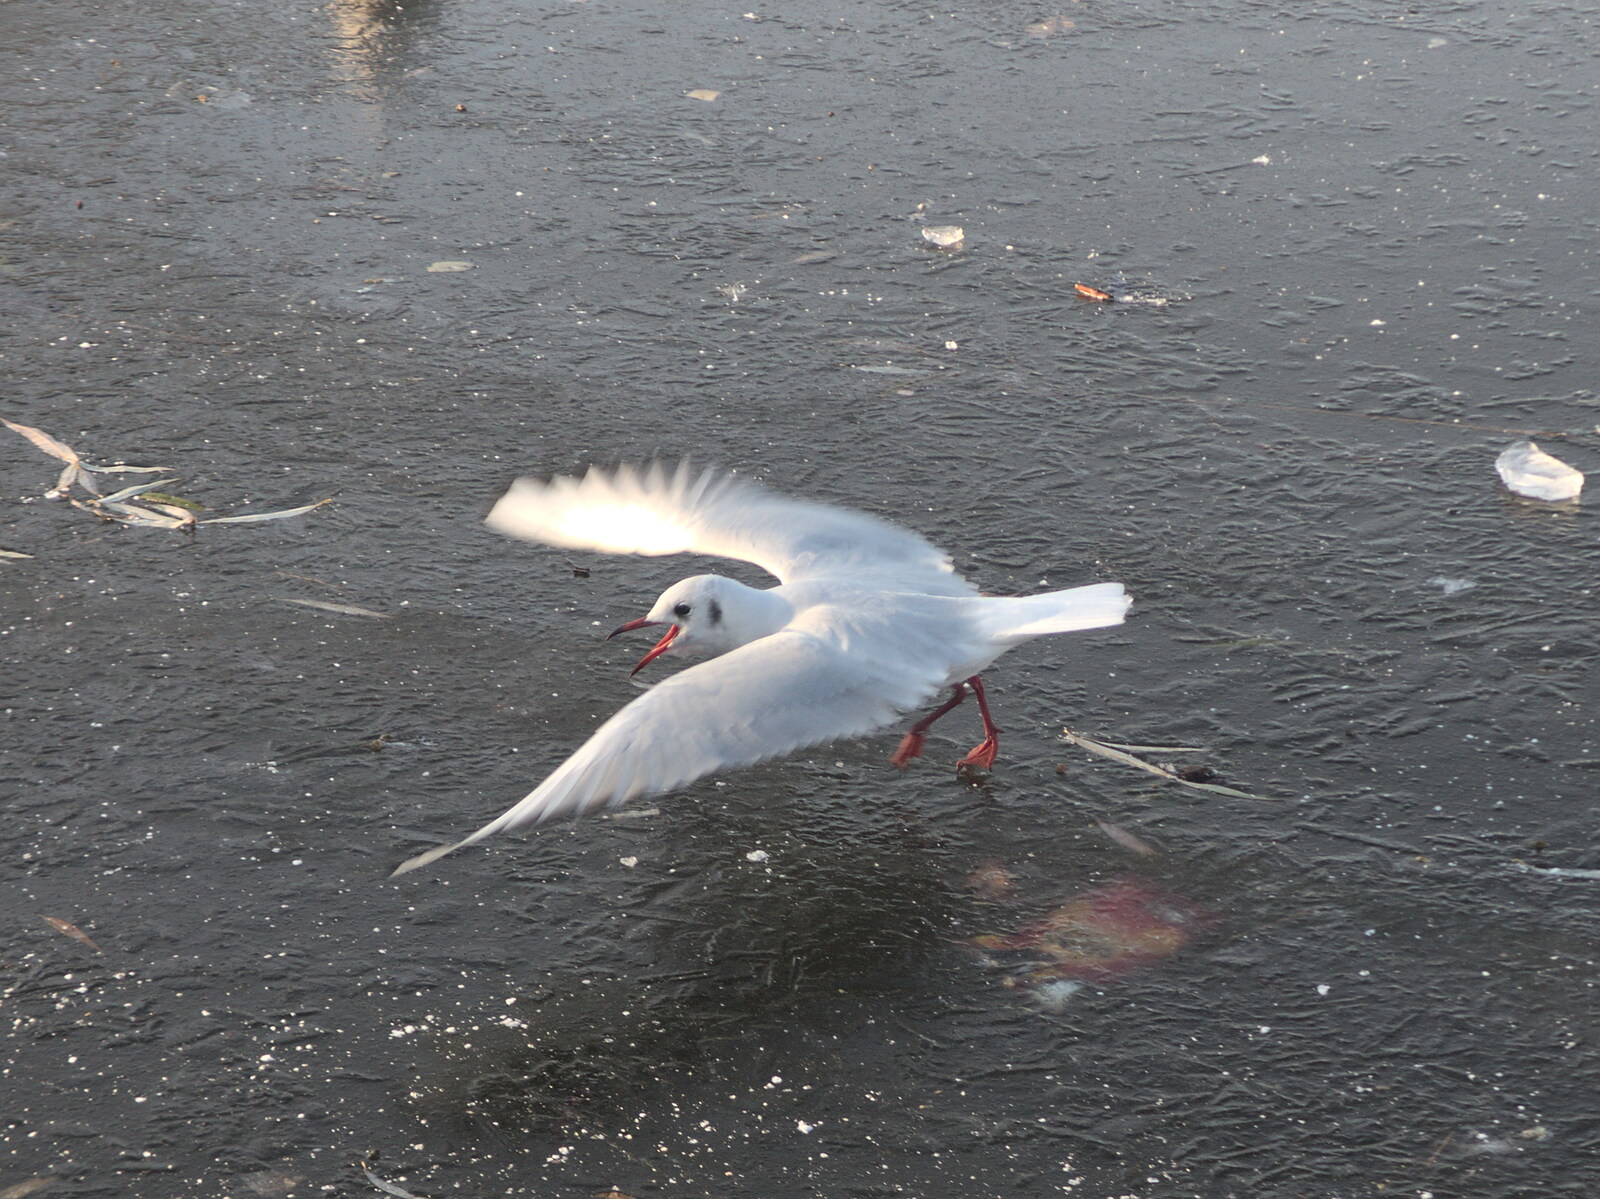 A gull takes off from the frozen Mere from A Shopping Trip to Bury St. Edmunds, Suffolk - 14th December 2022